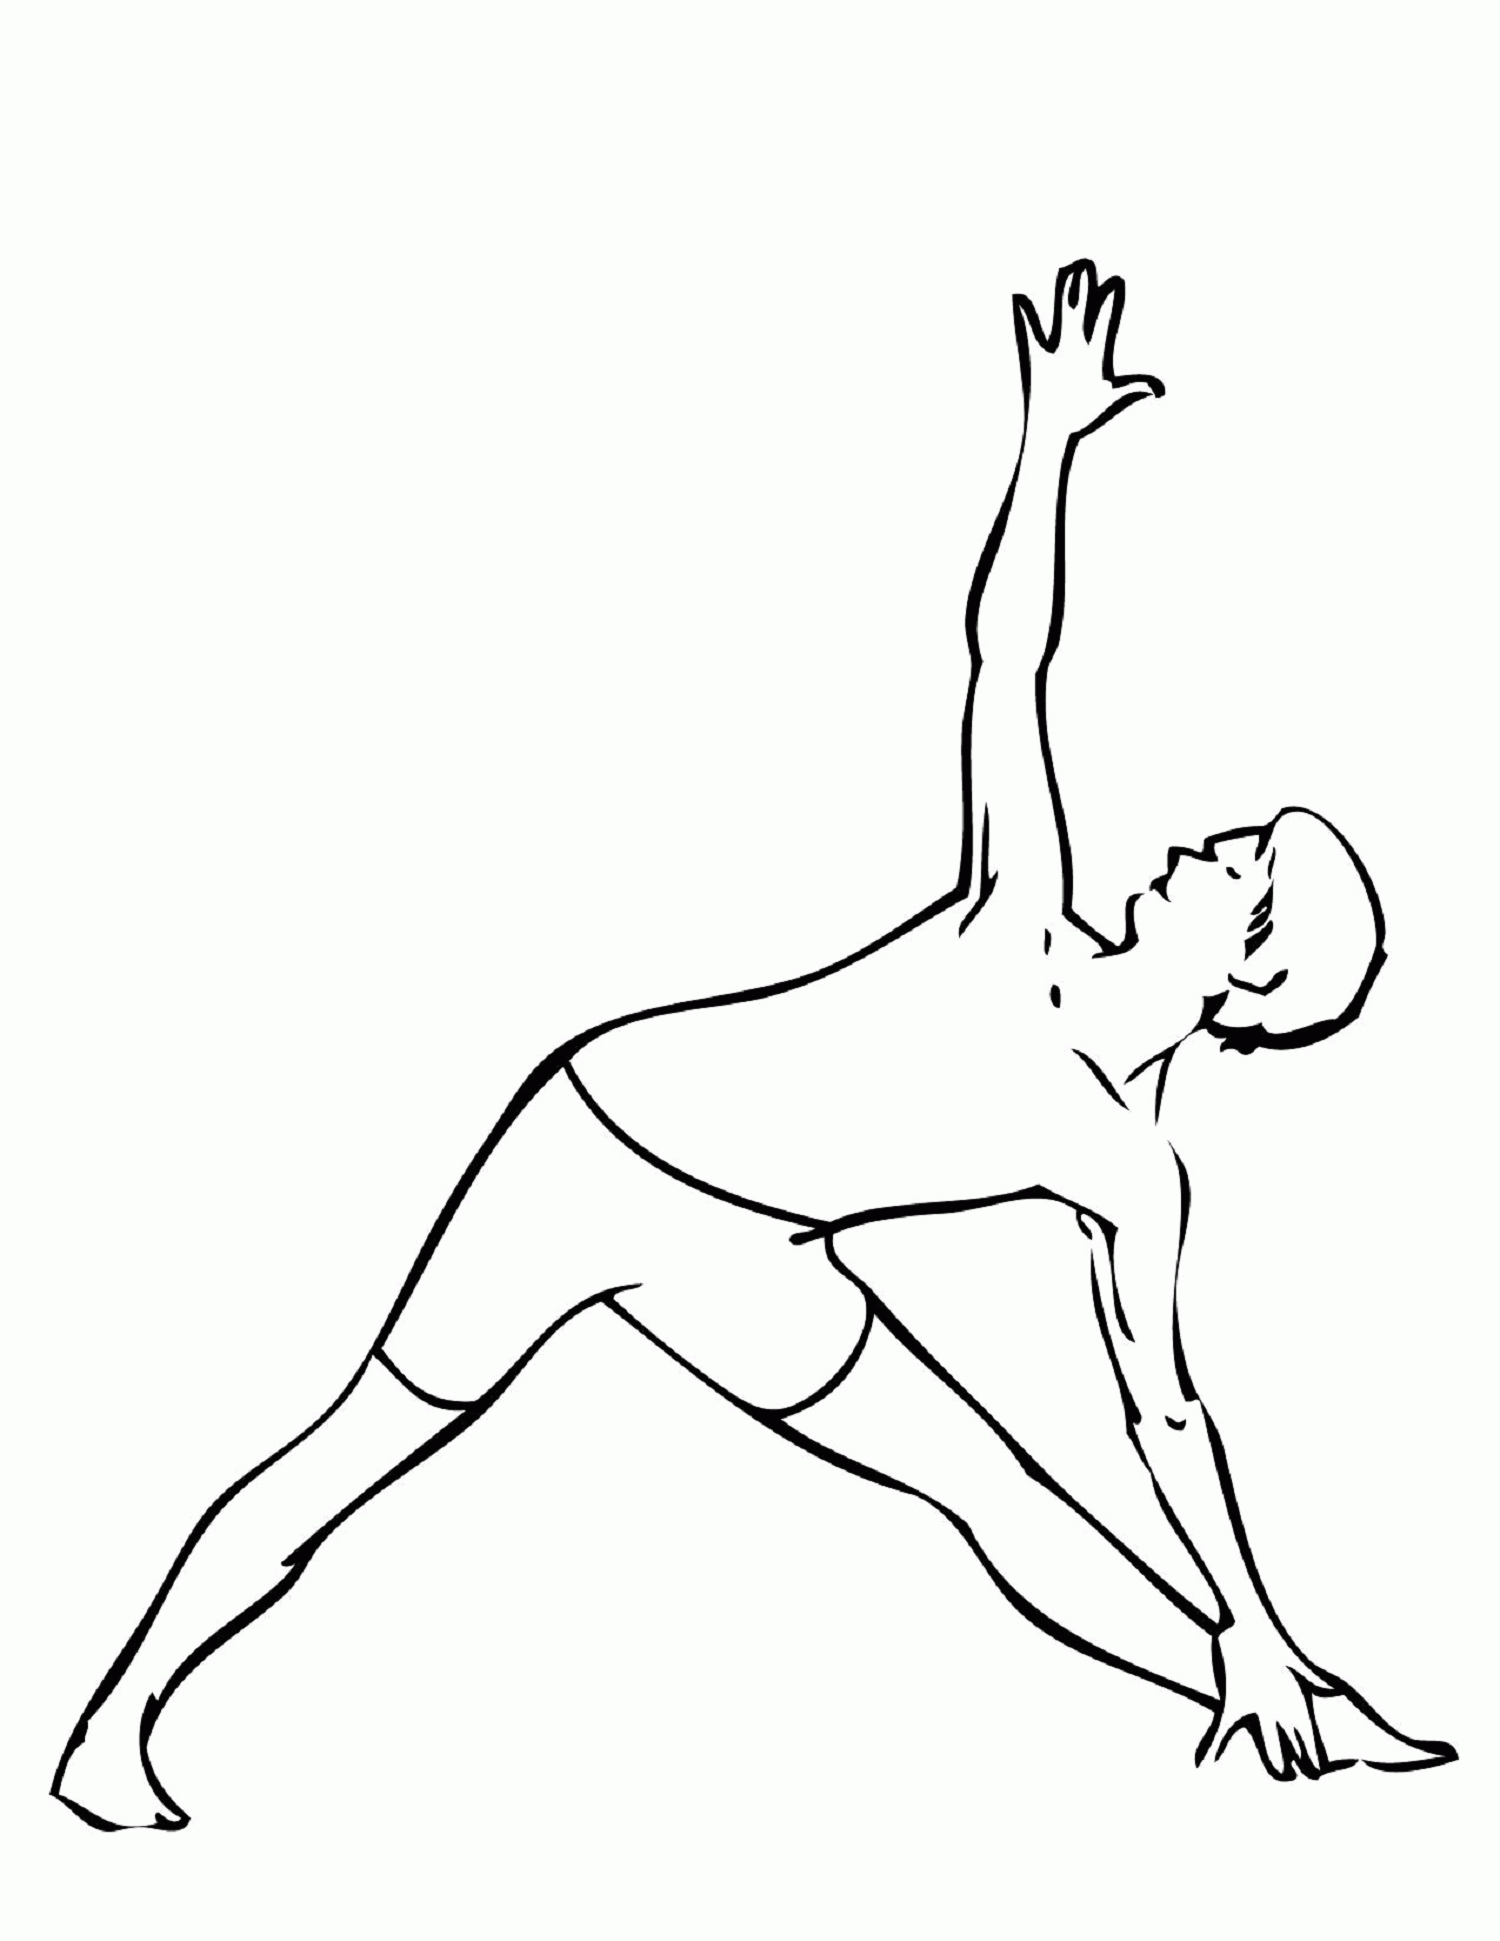 yoga-coloring-page-0018-q1